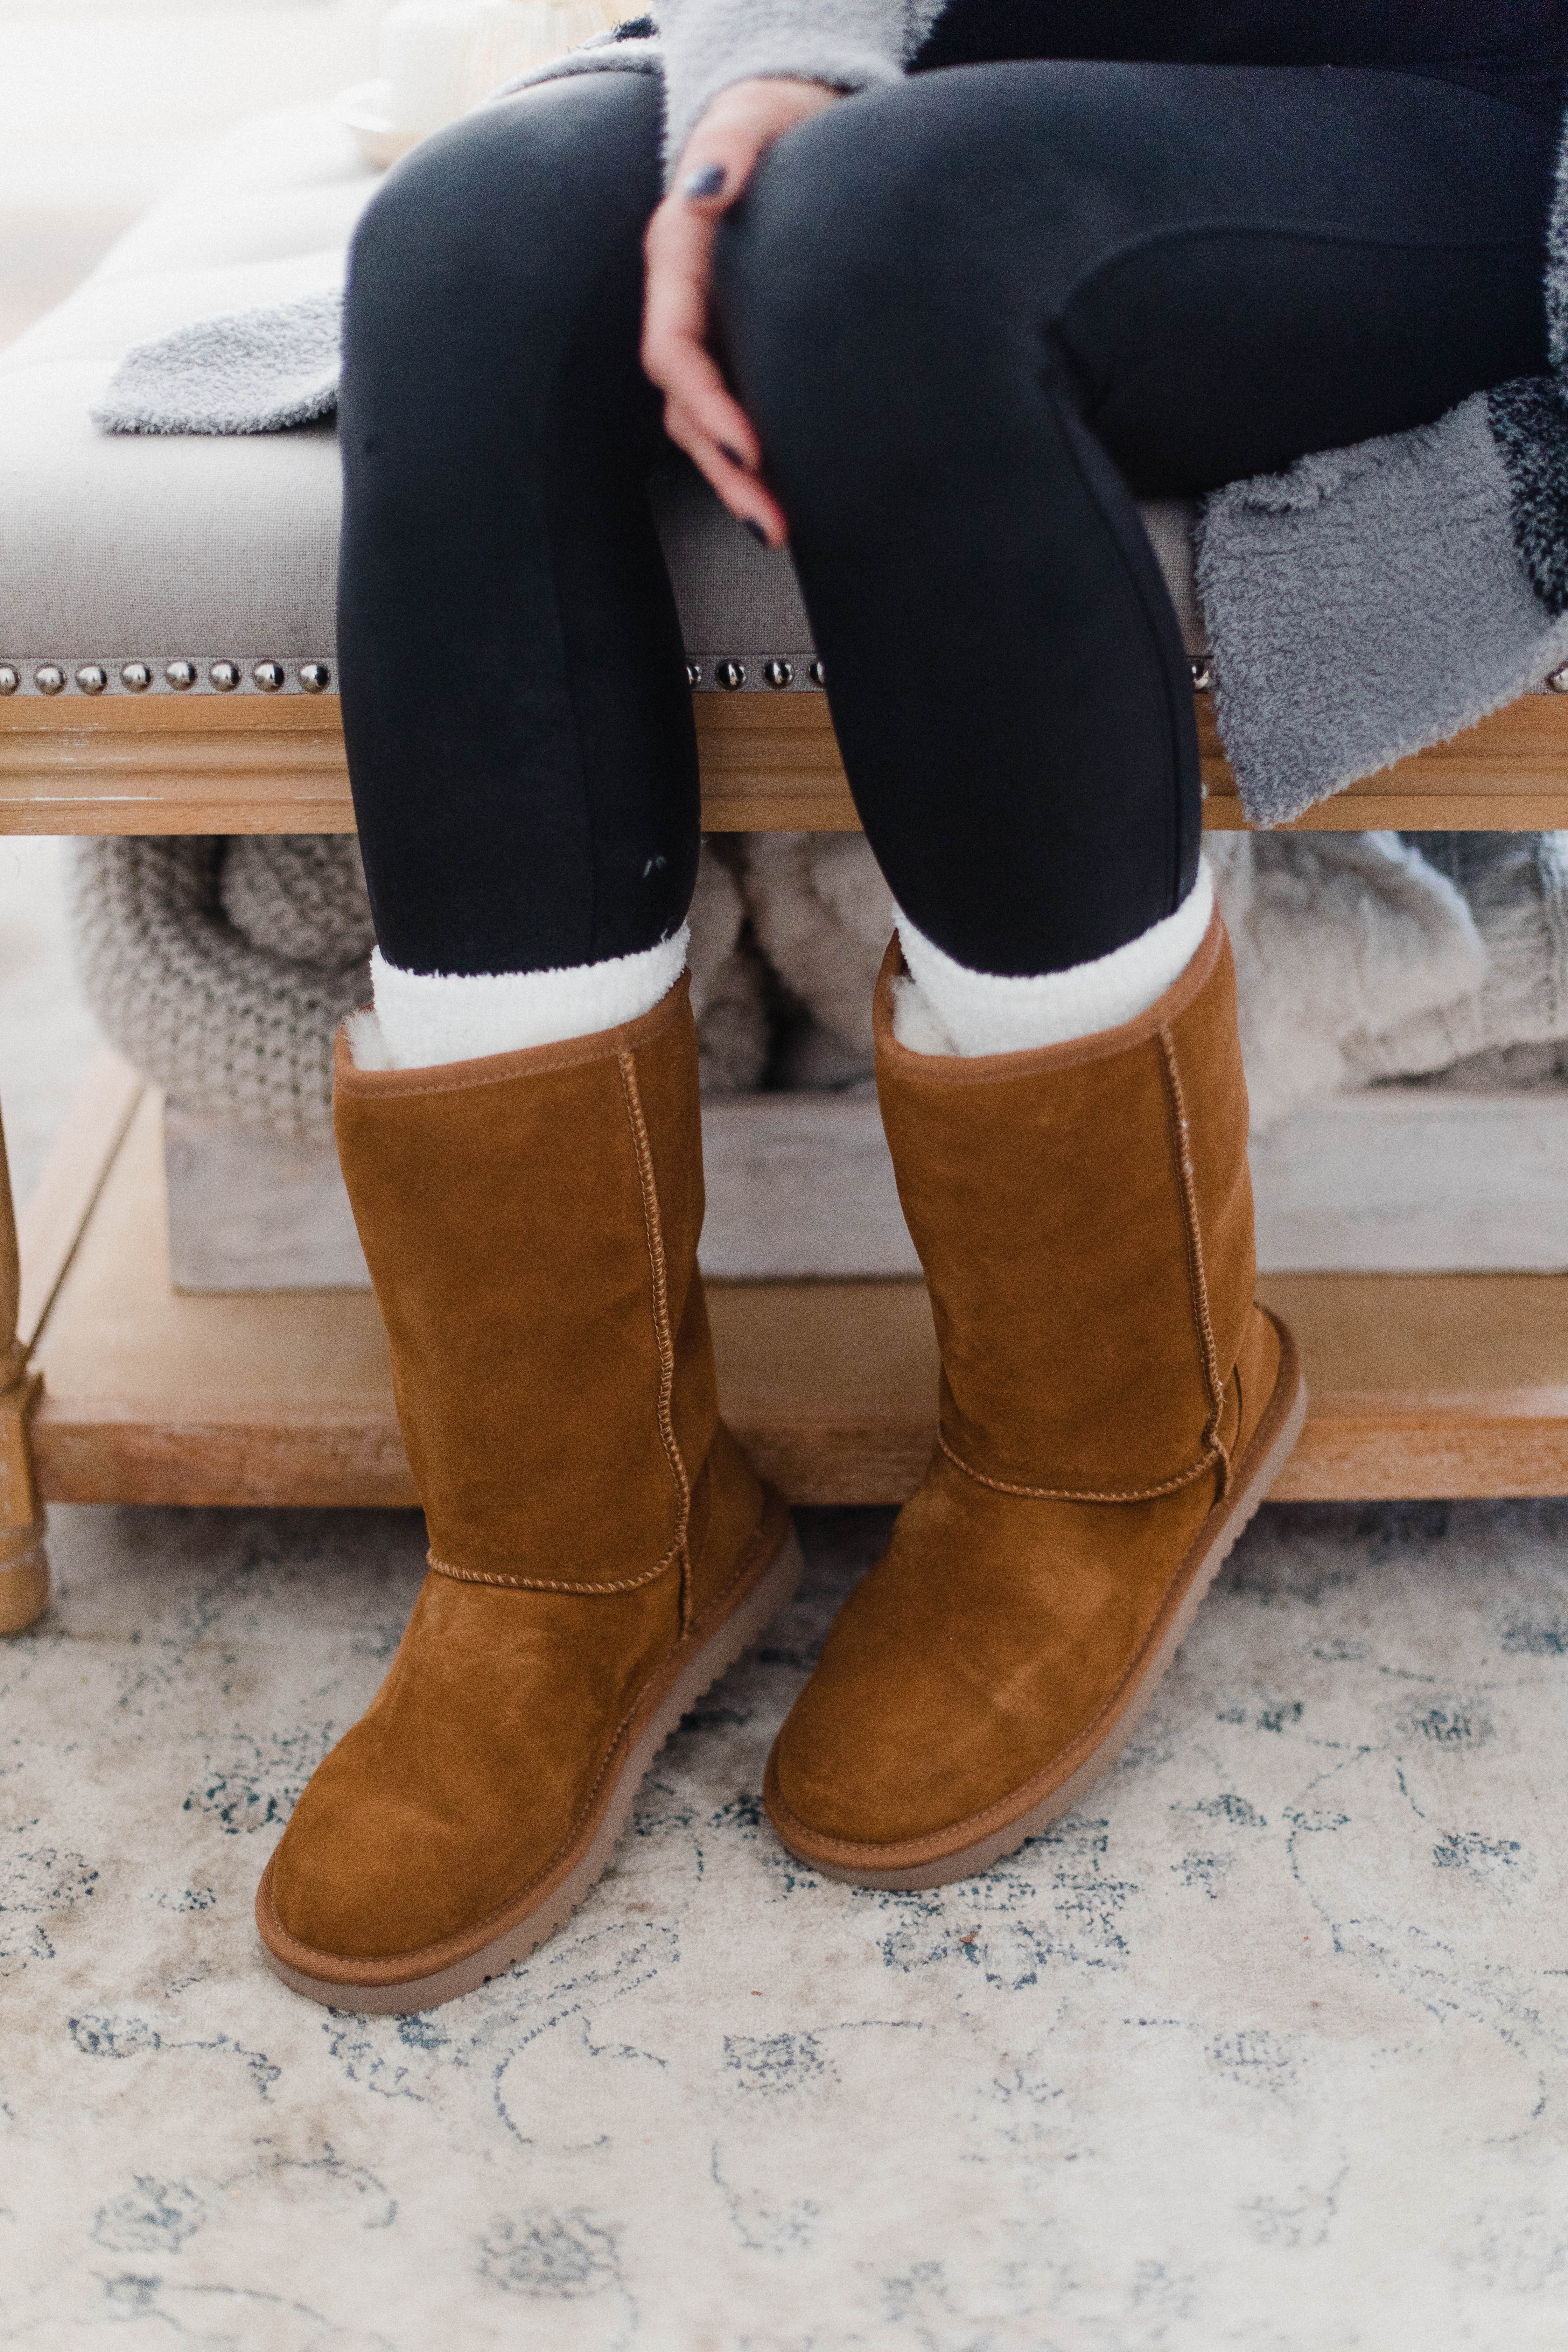 Connecticut life and style blogger Lauren McBride shares her Holiday Gift Guide for Cozy gifts, featuring Barefoot Dreams, Muk Luks, and more.